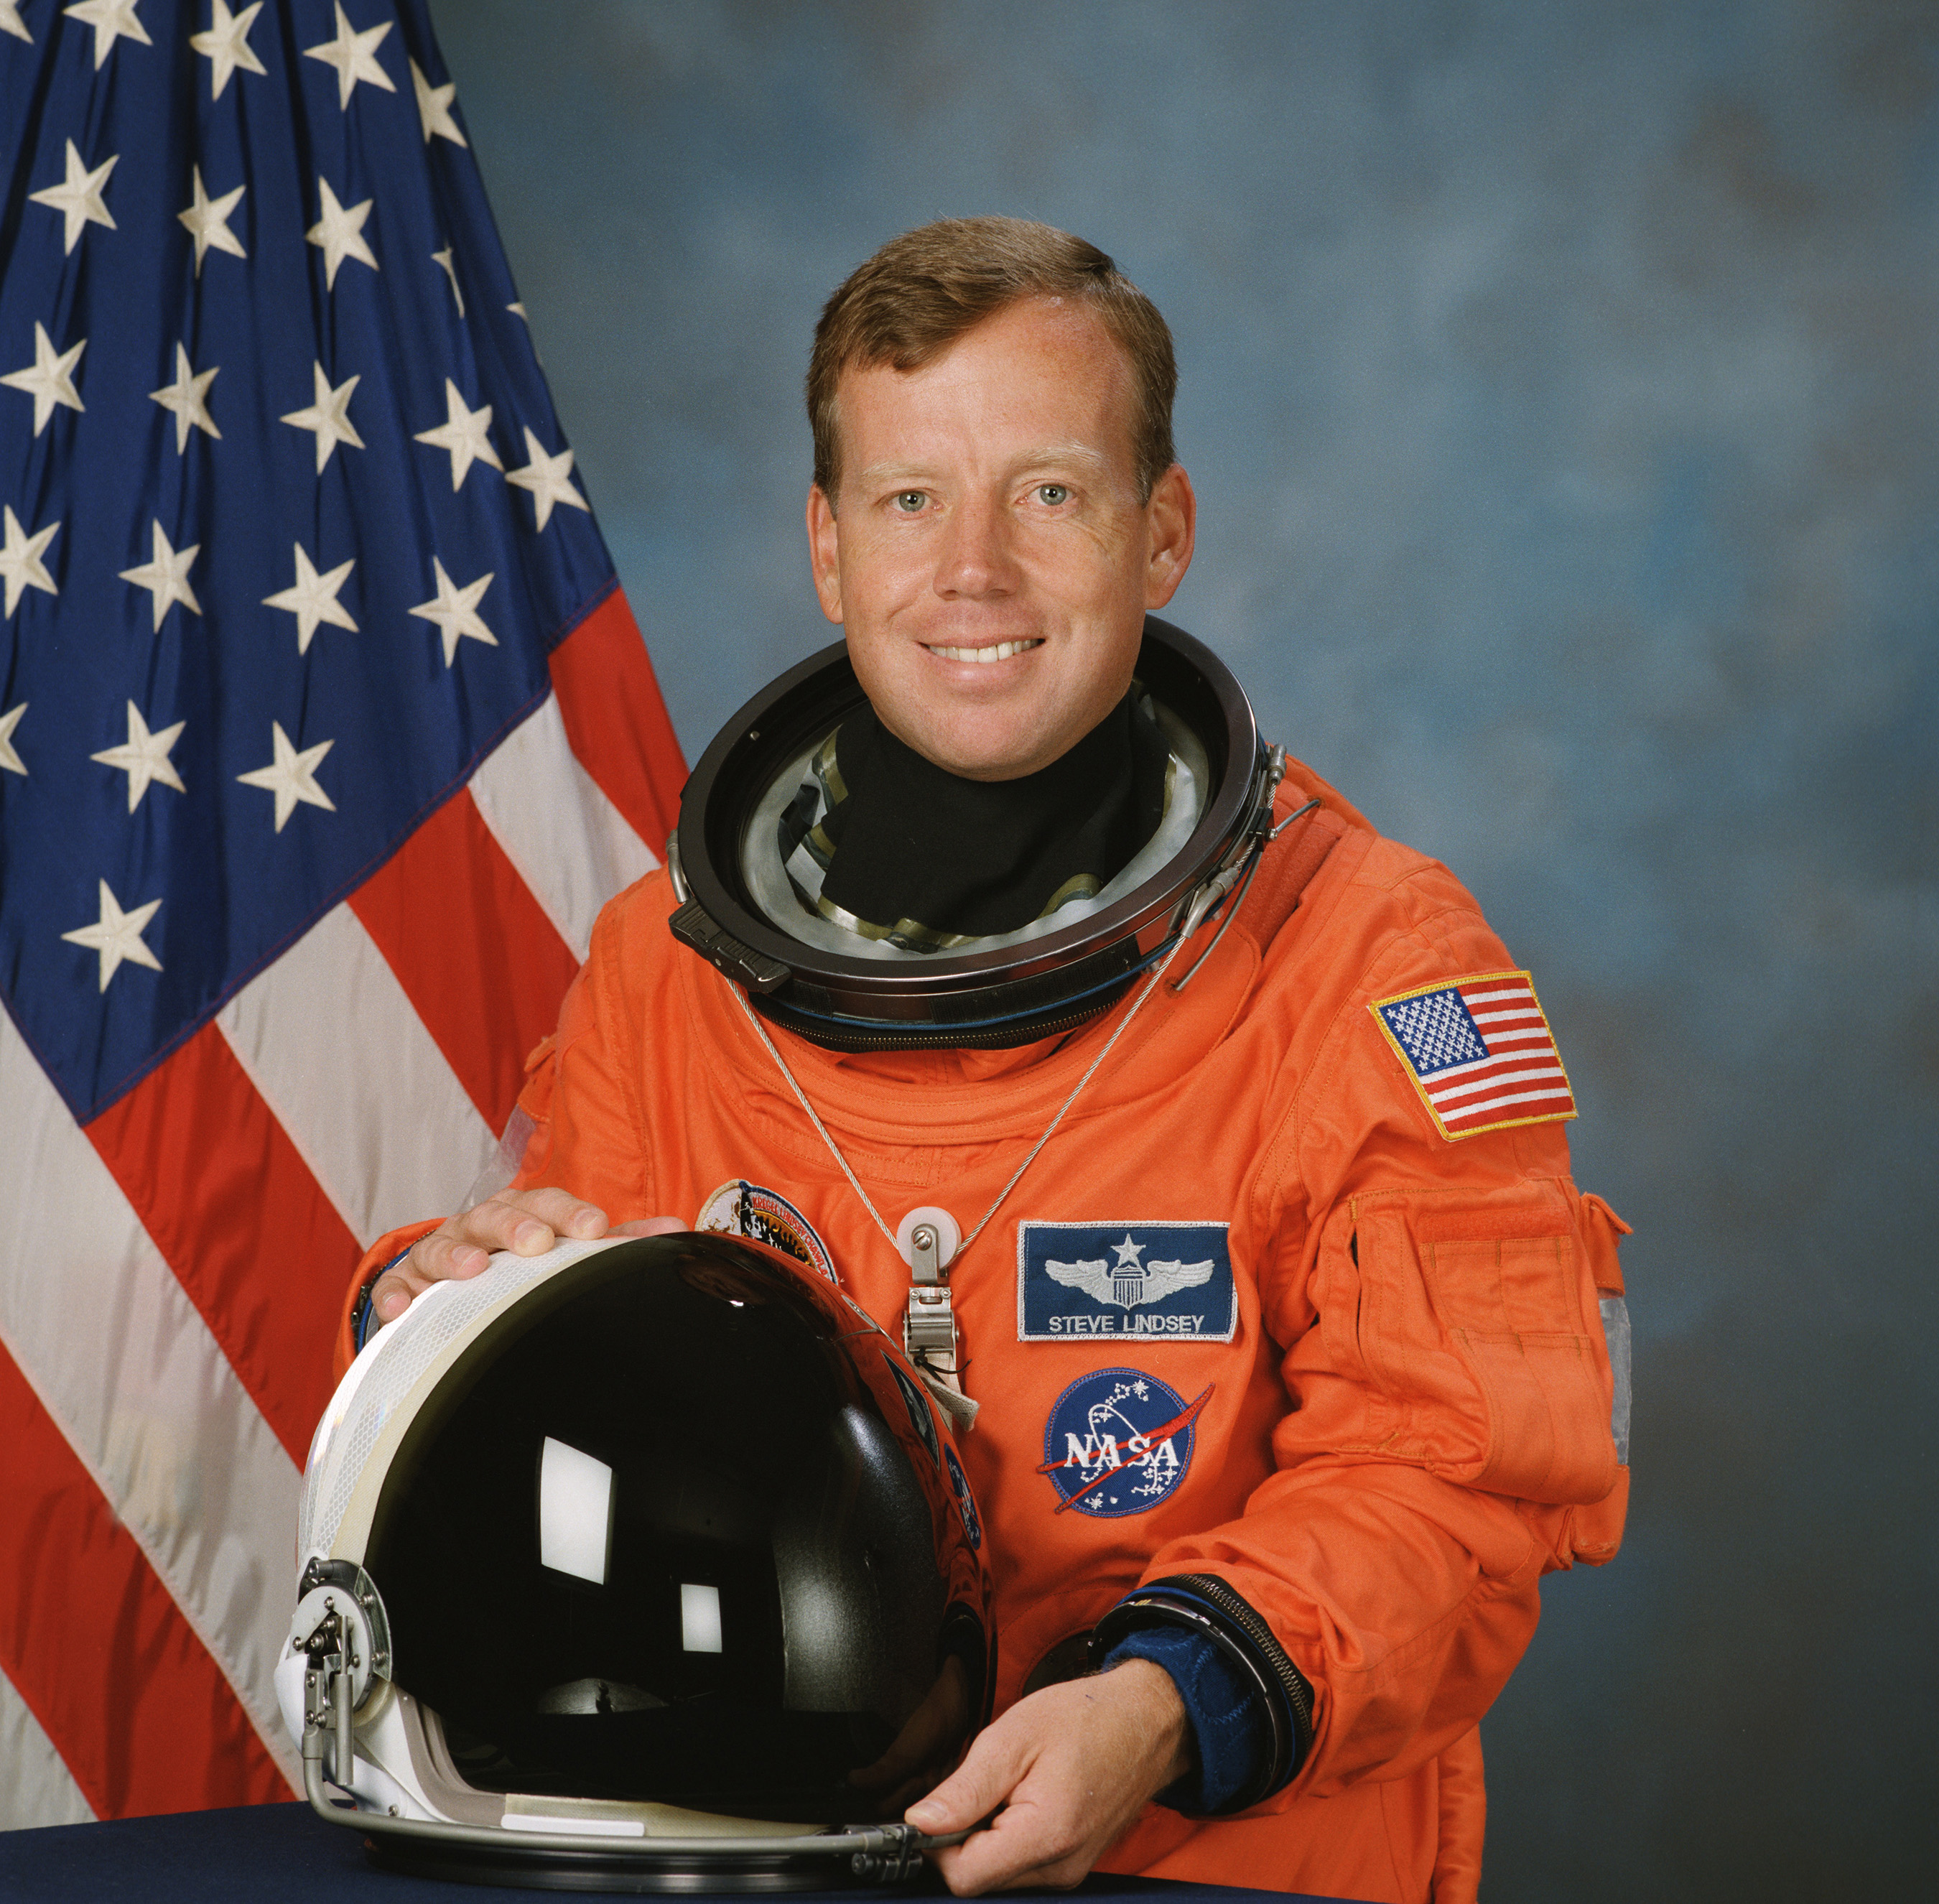 Steven Lindsey, veteran of five space shuttle missions, will be inducted into the U.S. Astronaut Hall of Fame on May 30 at Kennedy Space Center Visitor Complex.